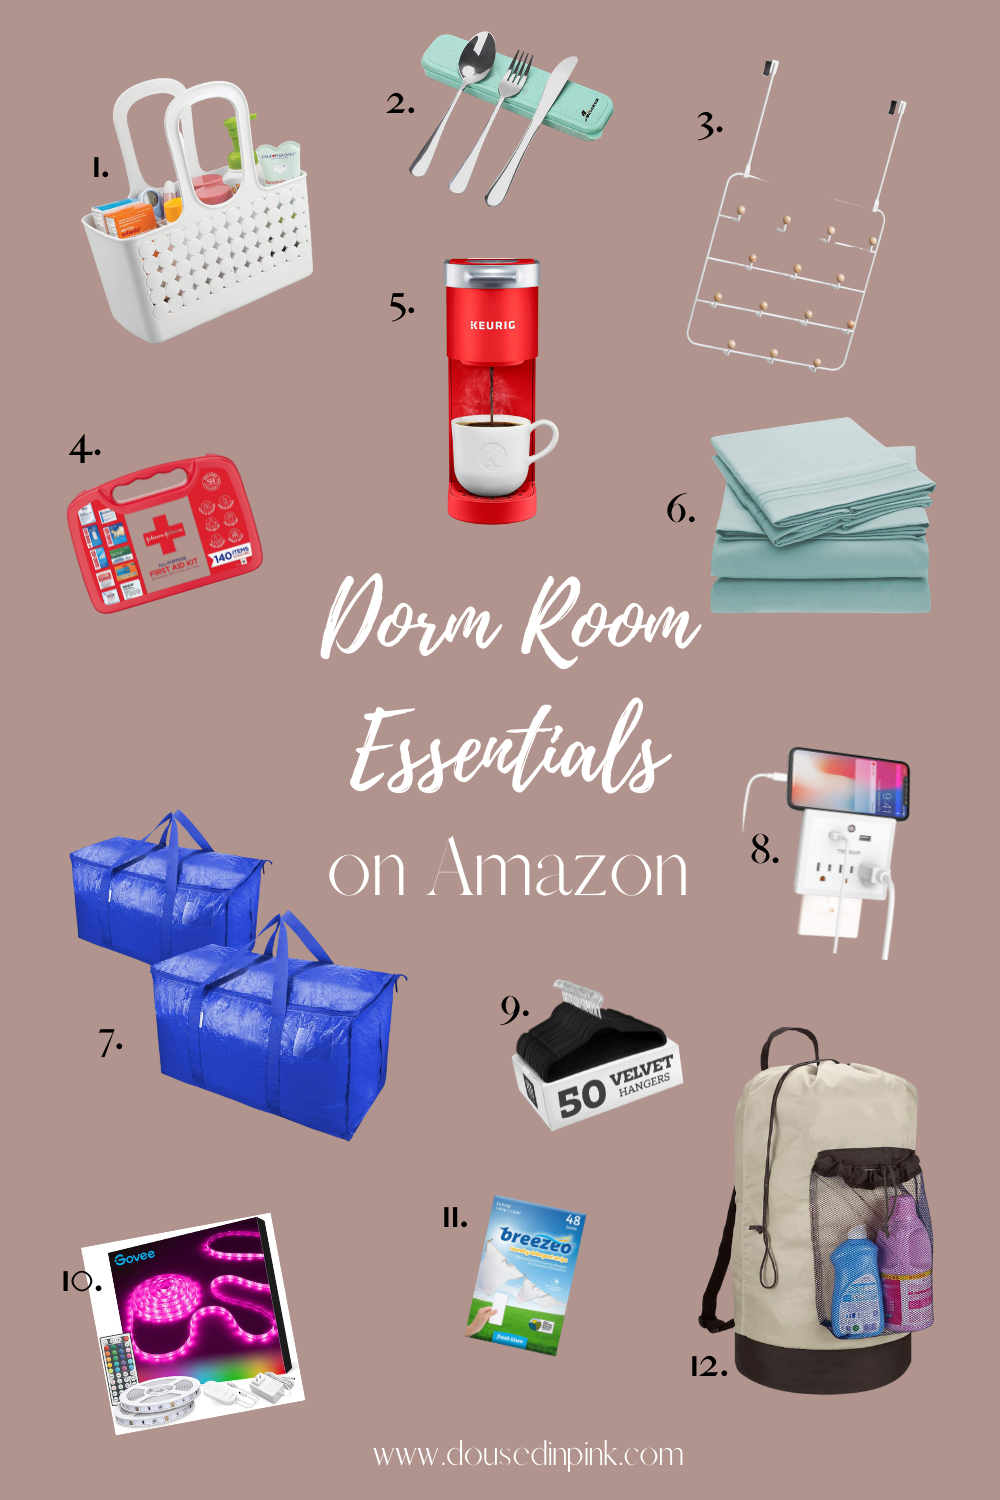 https://www.dousedinpink.com/wp-content/uploads/2021/08/Amazon-Back-to-School.png